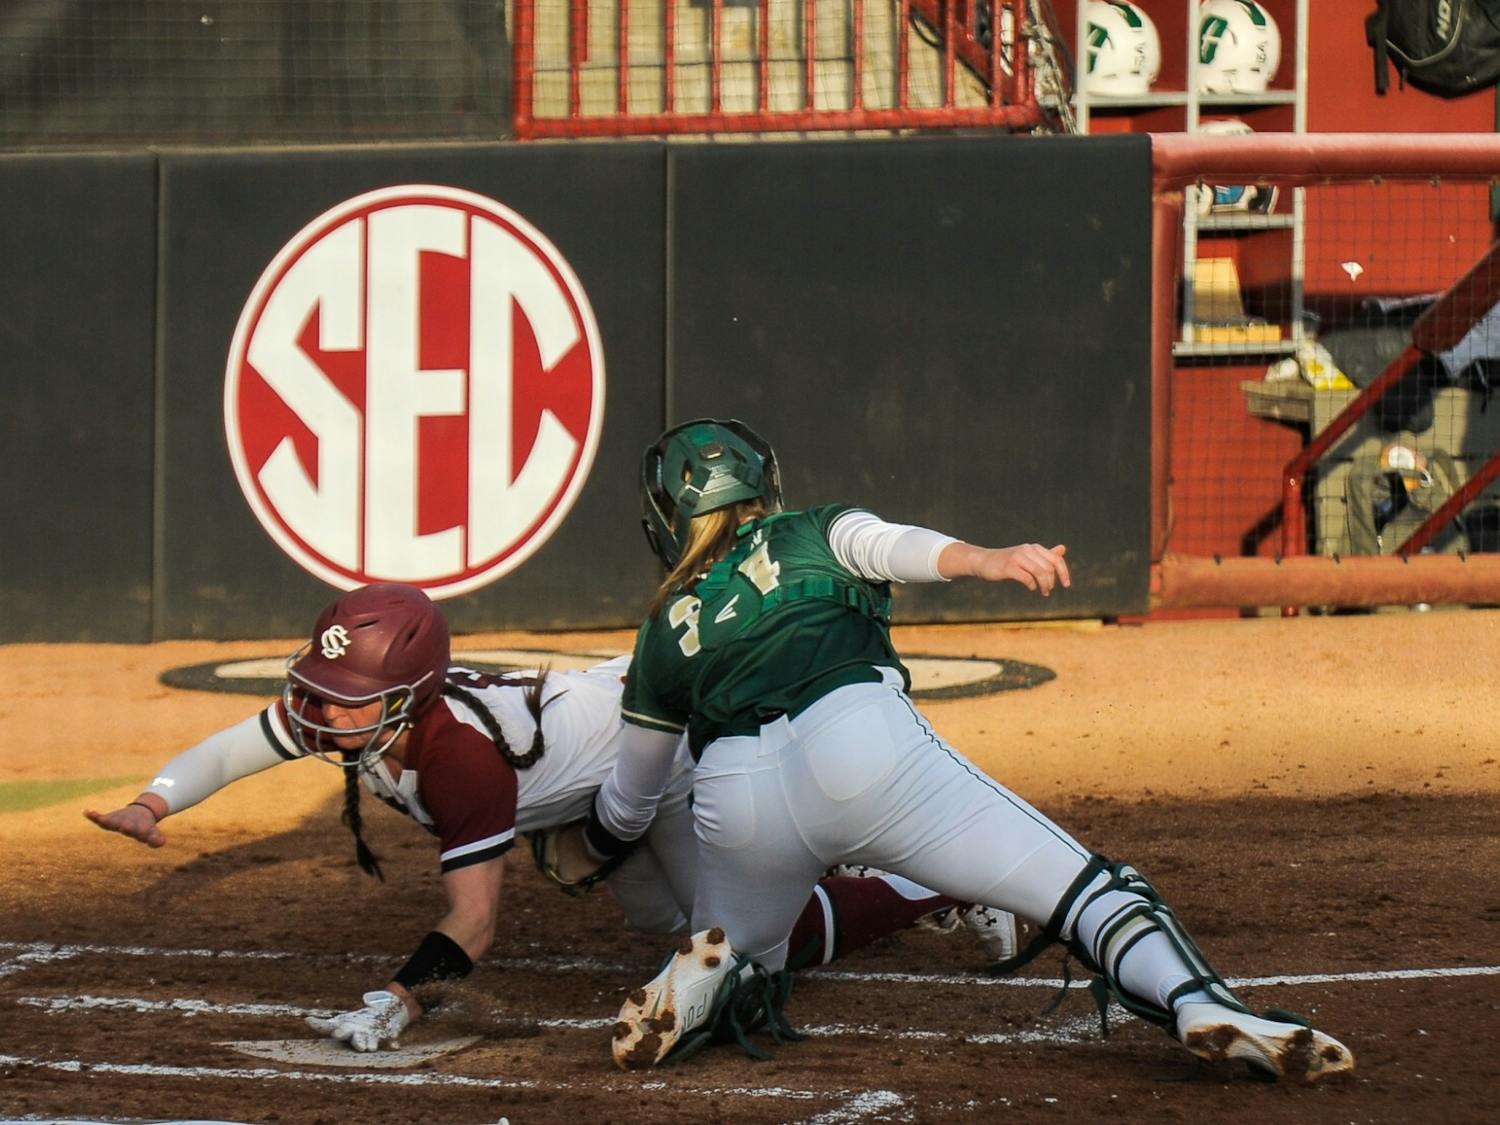 Junior catcher Jordan Fabian gets tagged on her way to the plate during the game against the Charlotte 49ers on Wednesday Feb. 16, 2022. The Carolina Gamecocks lost to the Charlotte 49ers 6 to 1.